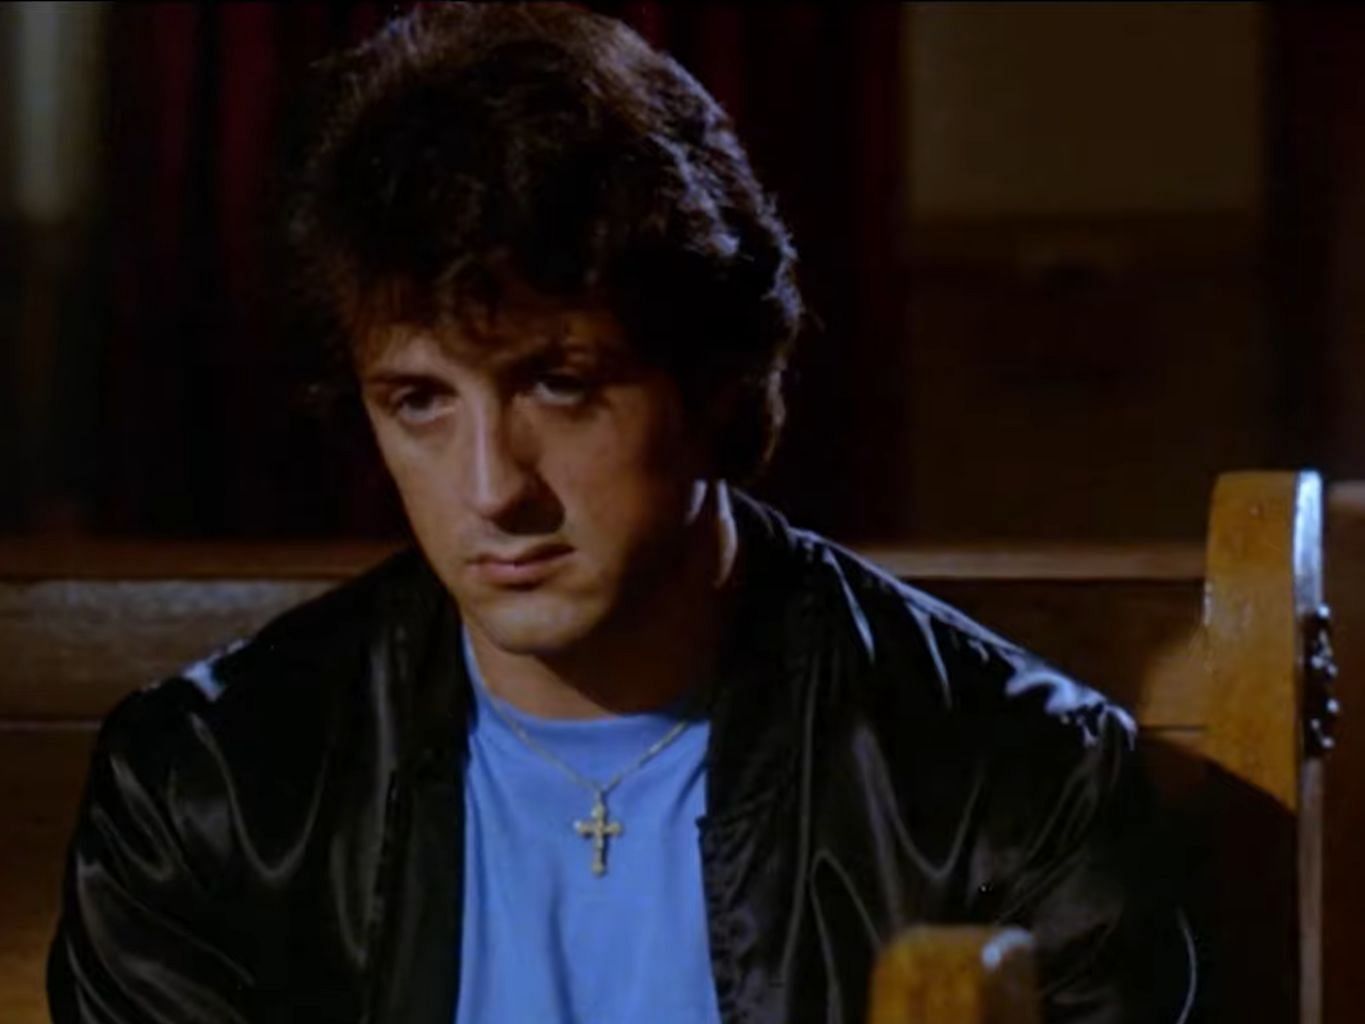 Sylvester Stallone in Rocky (image via YouTube/MGM Studios)